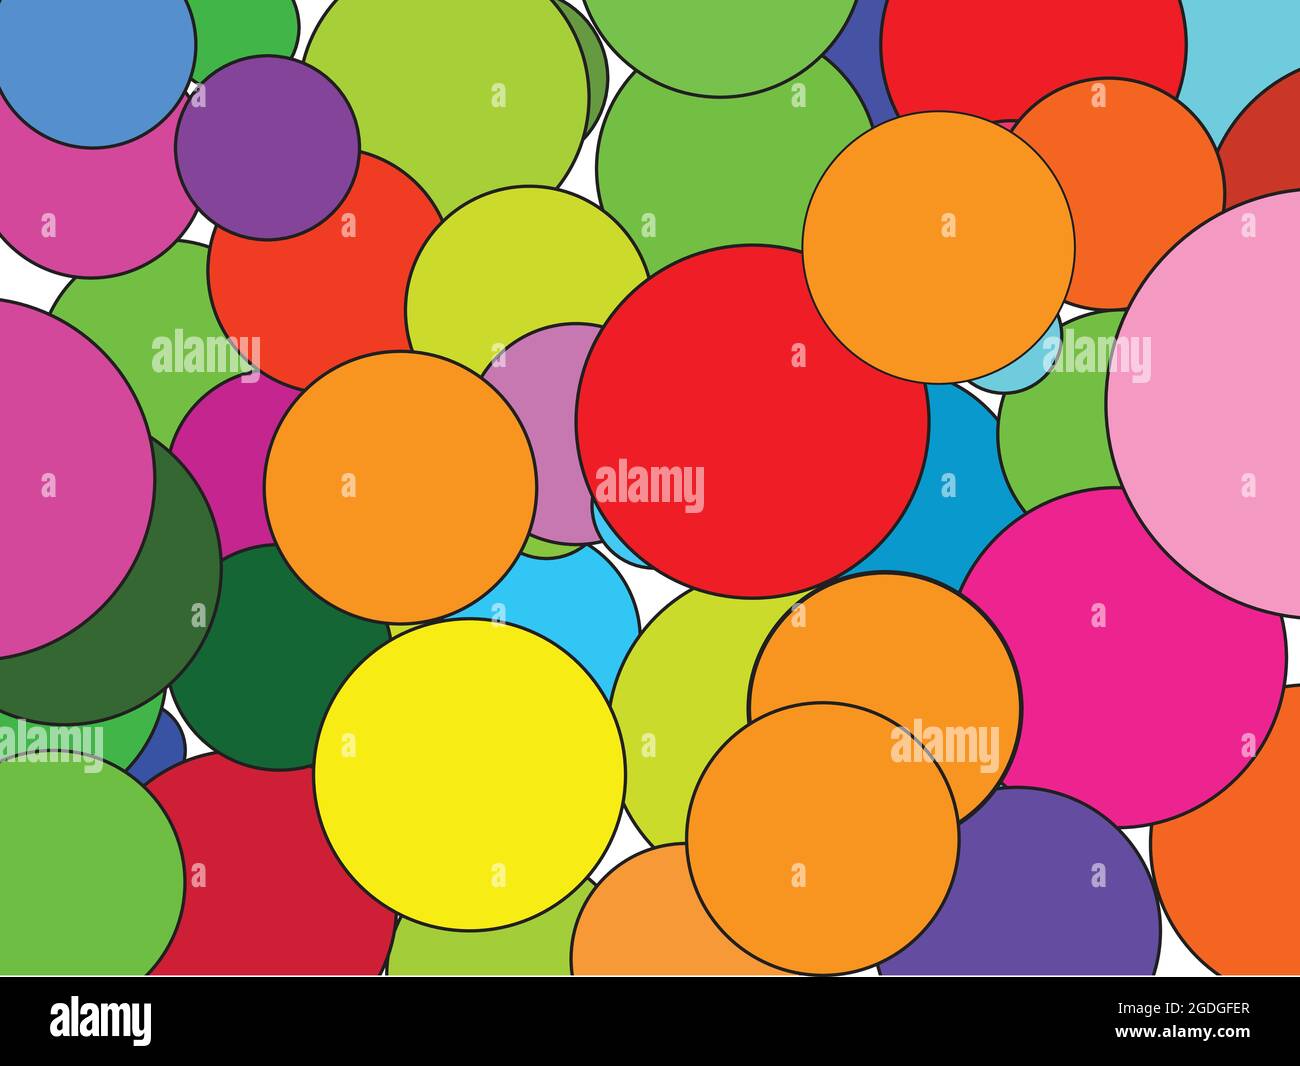 Abstract background vector design of colored circles Stock Vector